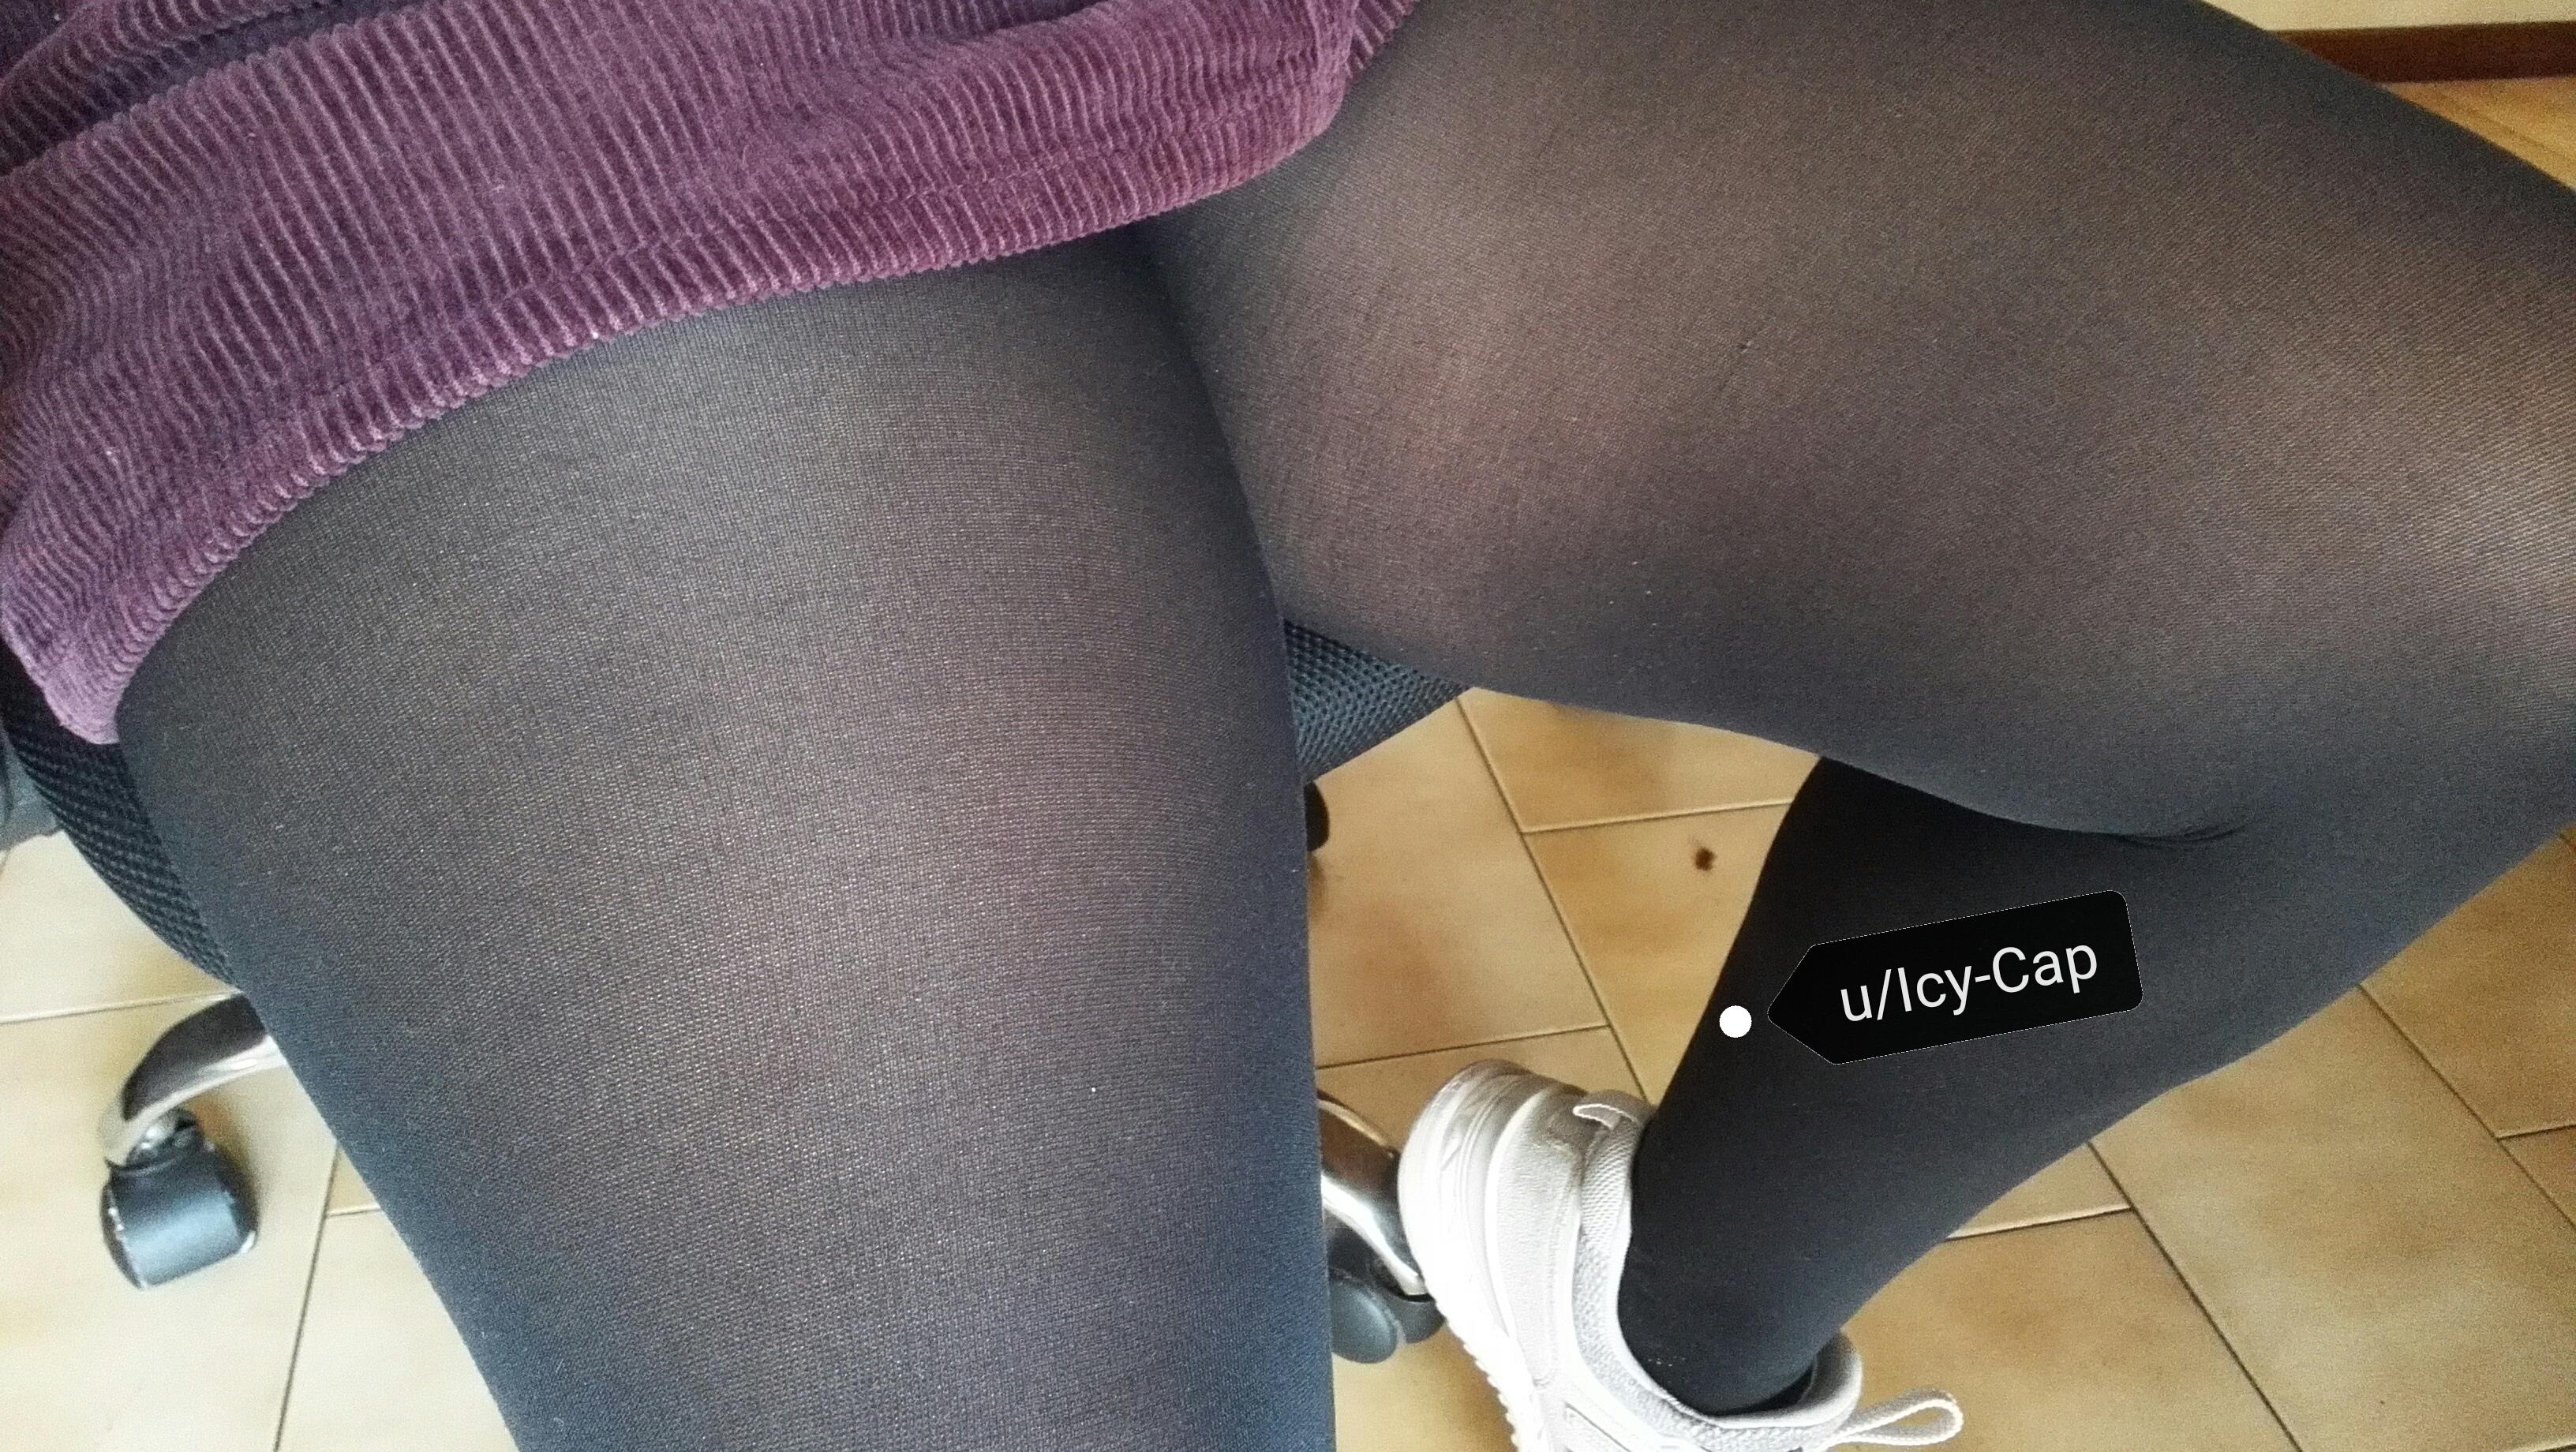 Havent worn pantyhose in while felt good